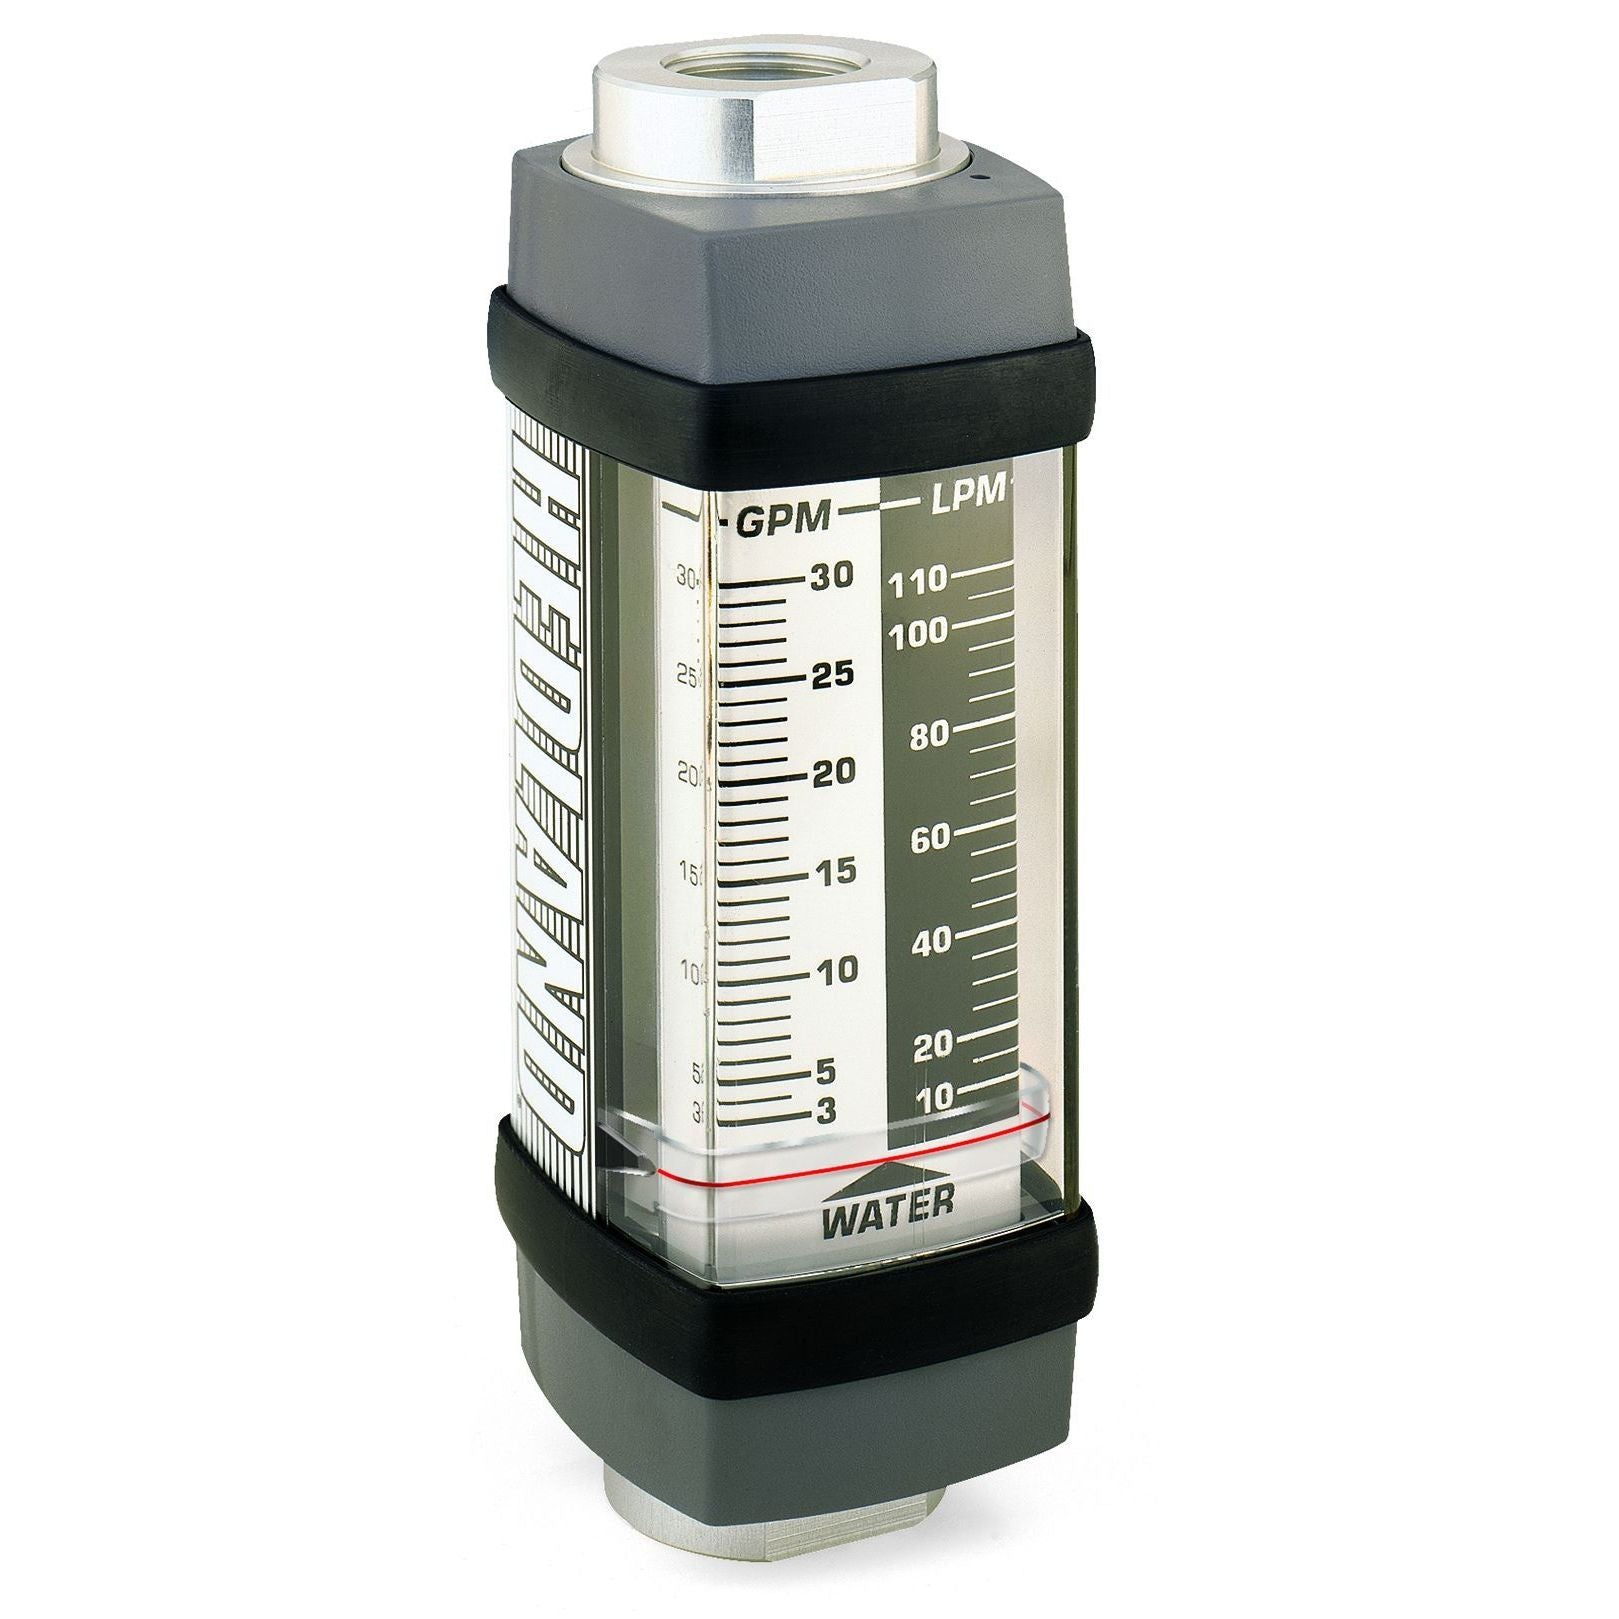 H741X-005 : Hedland 5000psi 316SS Flow Meter for Caustic or Corrosive Liquids, 1 NPT, 0.5 to 5.0 GPM